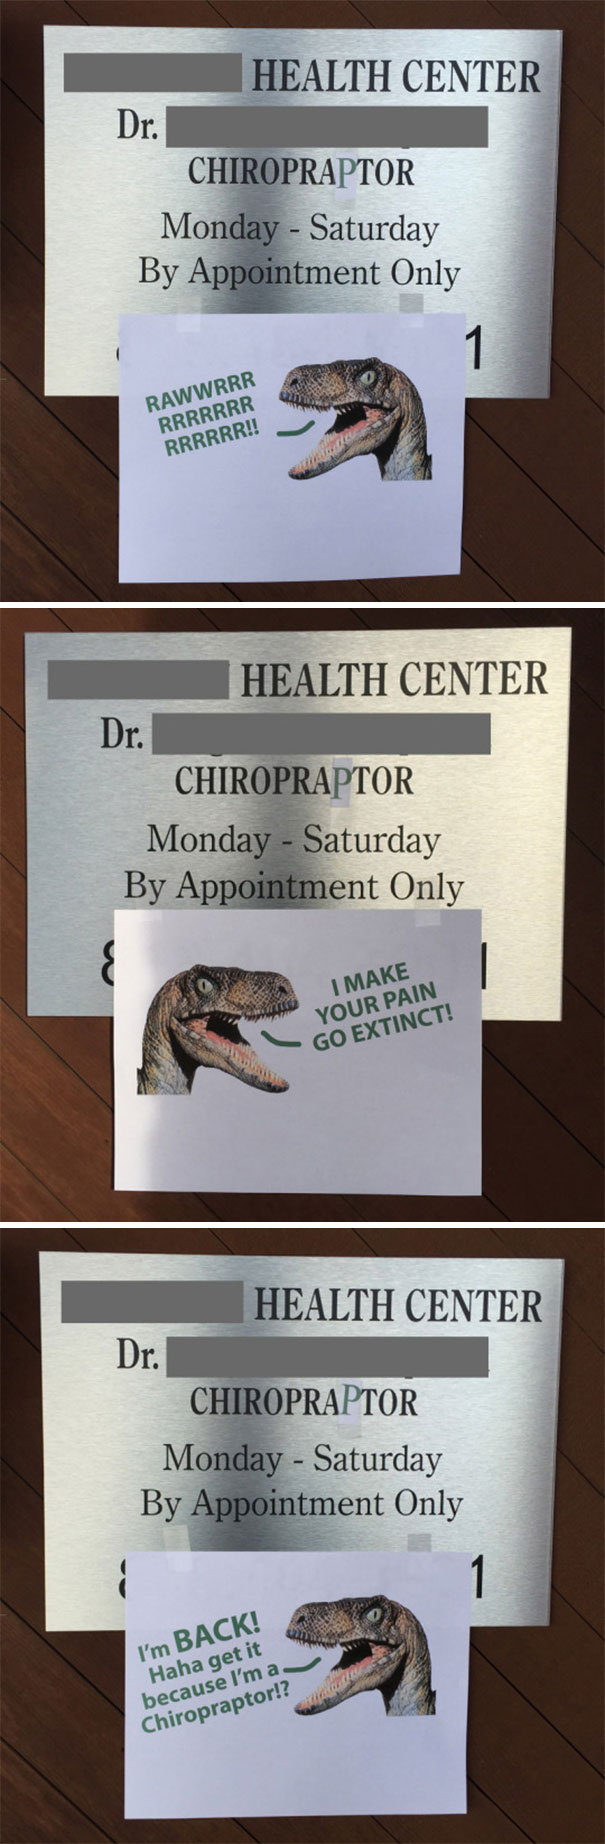 chiropractor puns - Health Center Dr. Chiropraptor Monday Saturday By Appointment Only Rawwrrr Rrrrrrr Rrrrrr!! Health Center Dr. Chiropraptor Monday Saturday By Appointment Only I Make Your Pain Go Extinct! Health Center Dr. Chiropraptor Monday Saturday 